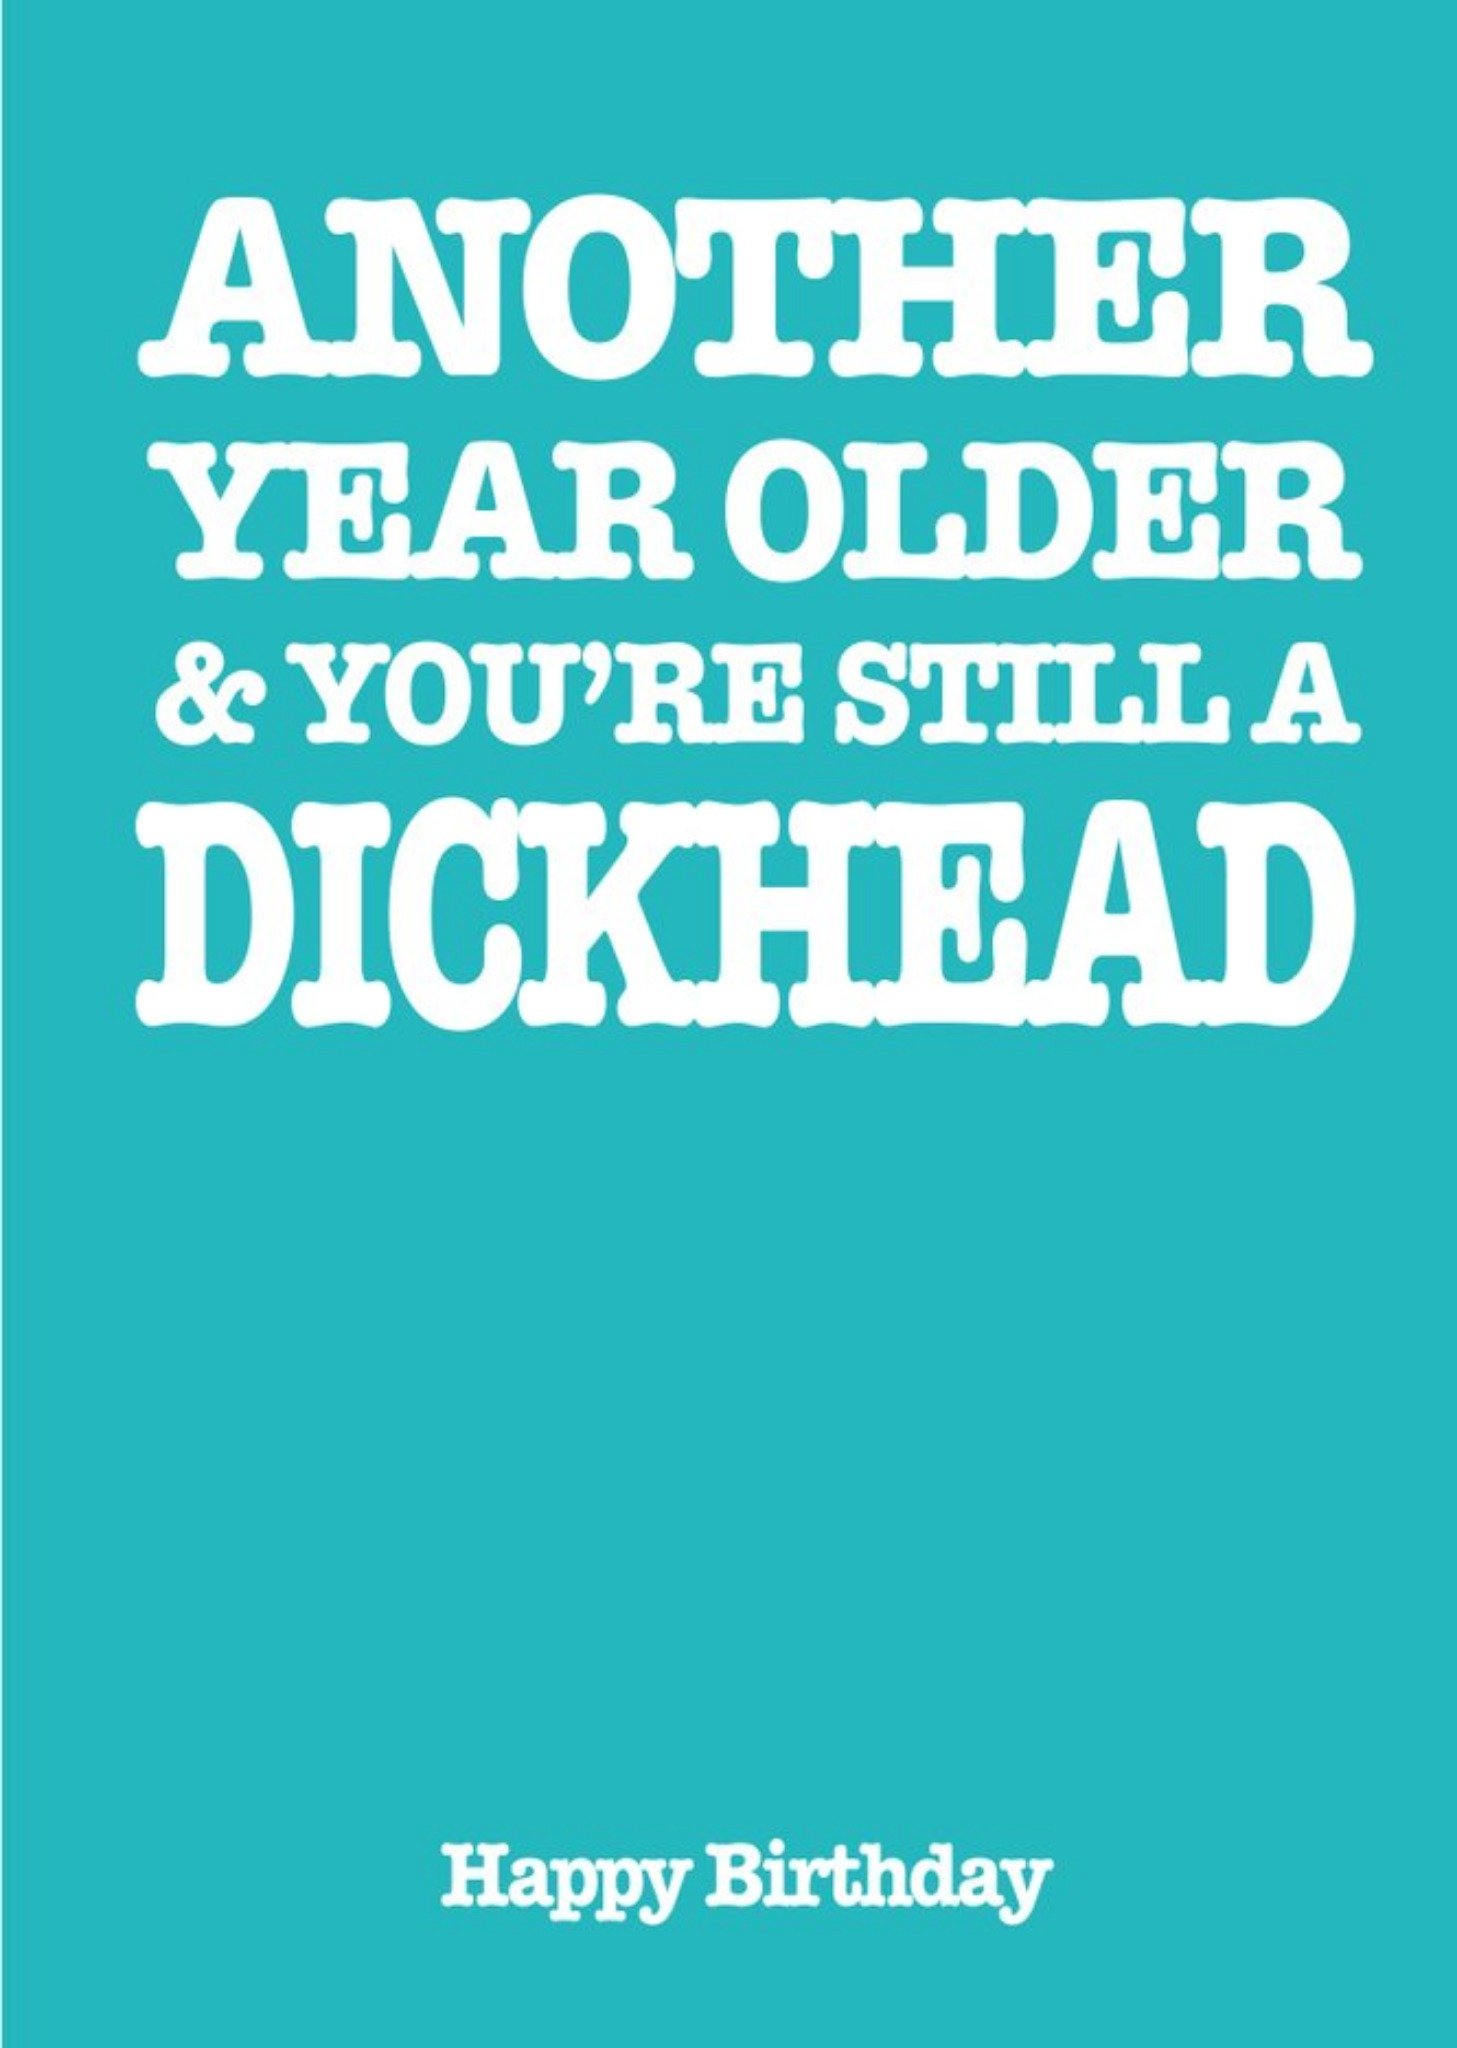 Filthy Sentiments Another Year Older And You Are Still A Dickhead Birthday Card, Large